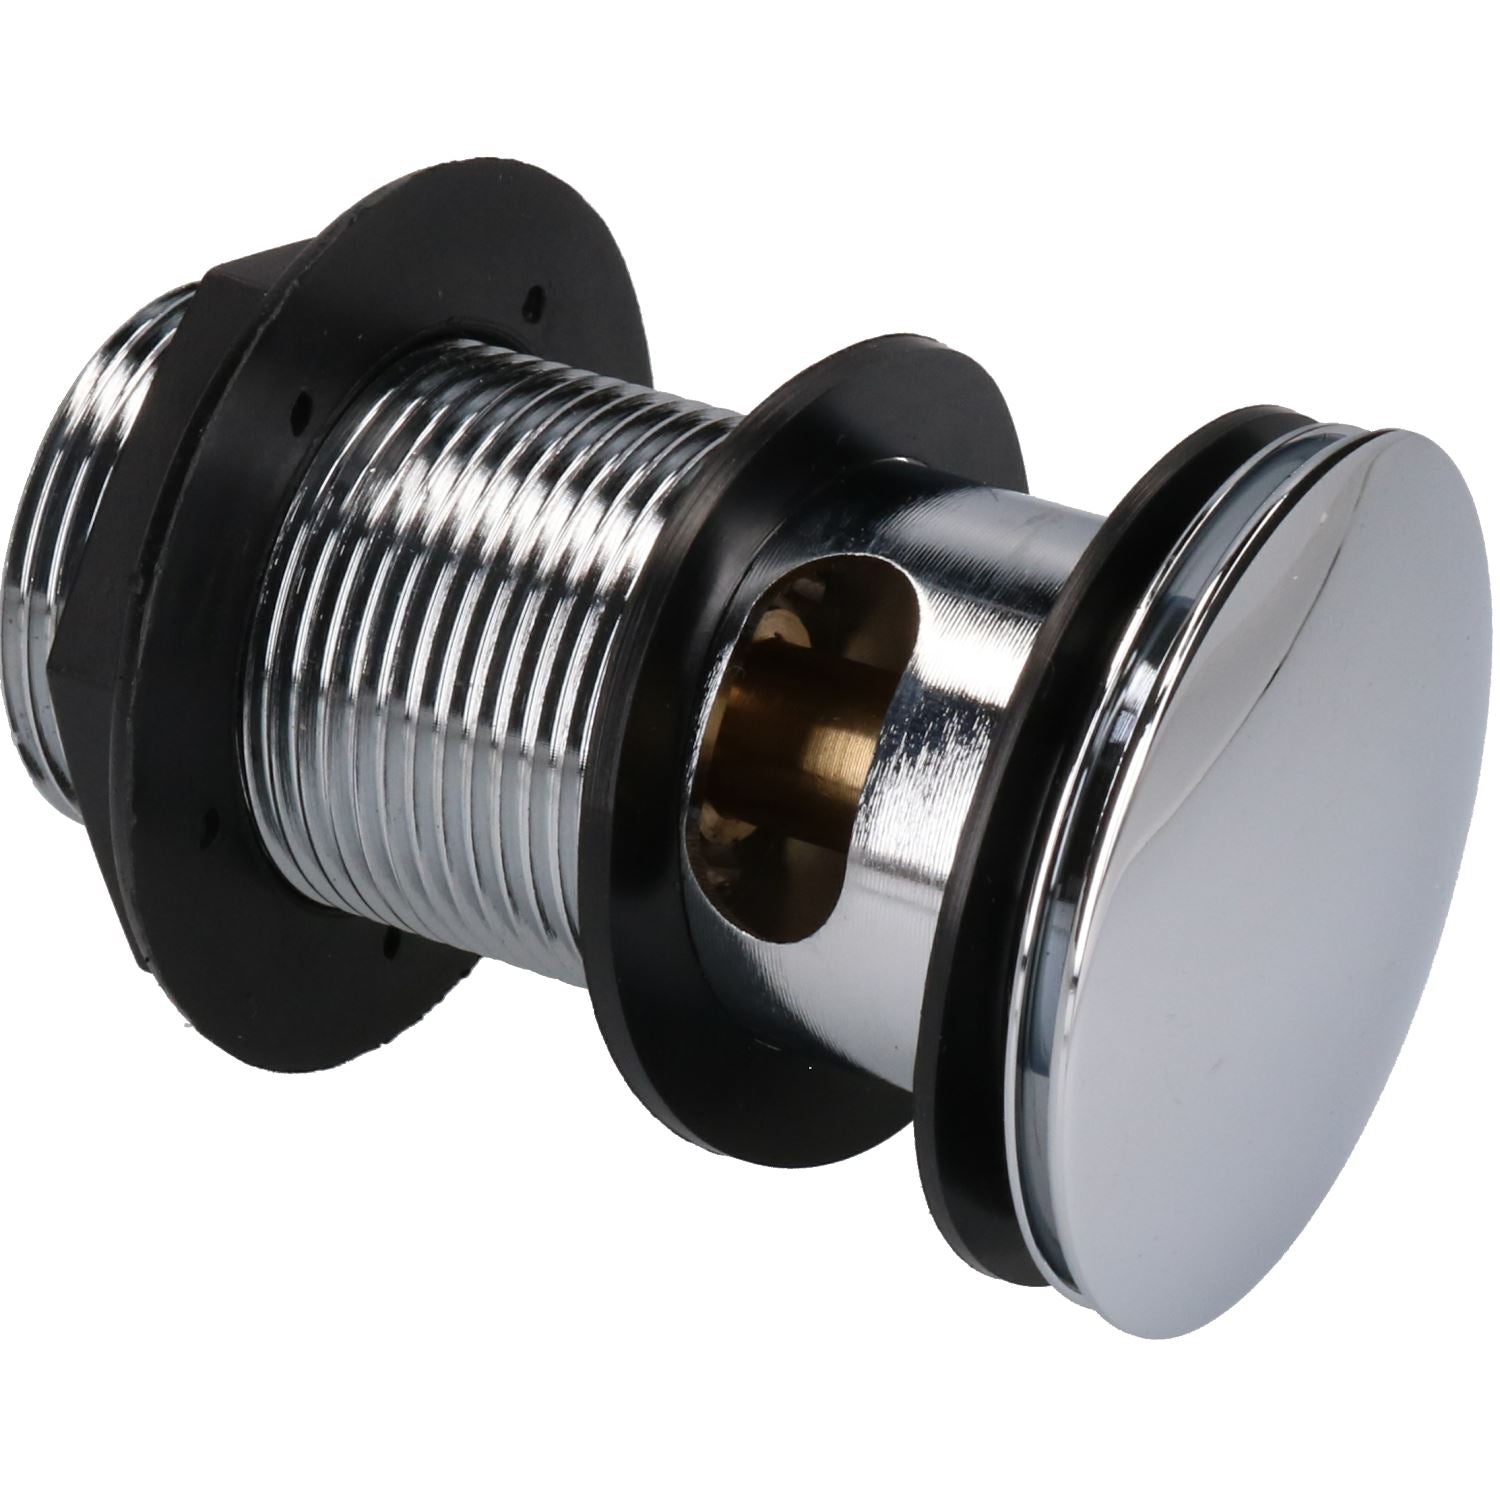 1-1/4" (32mm) Push-button Quick-Clac Chrome-Plated Brass Basin Bath Plug Slotted